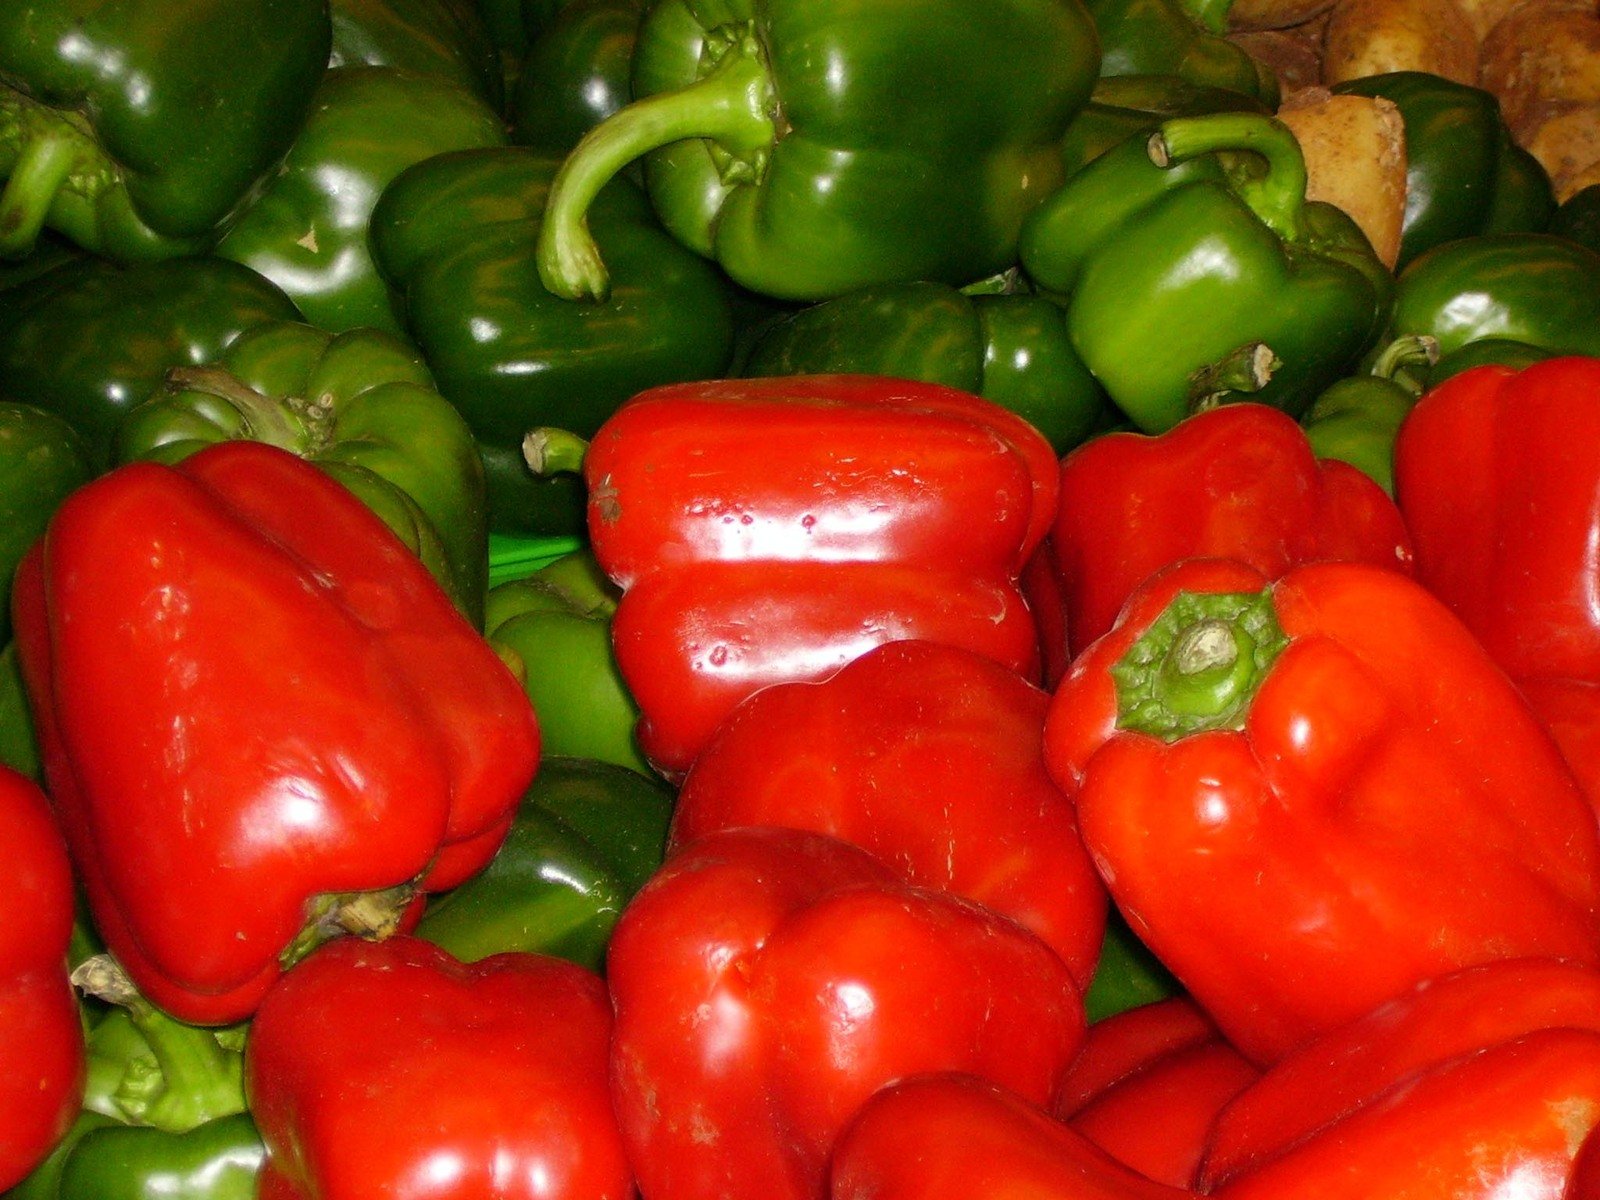 pile of different types of peppers together for sale